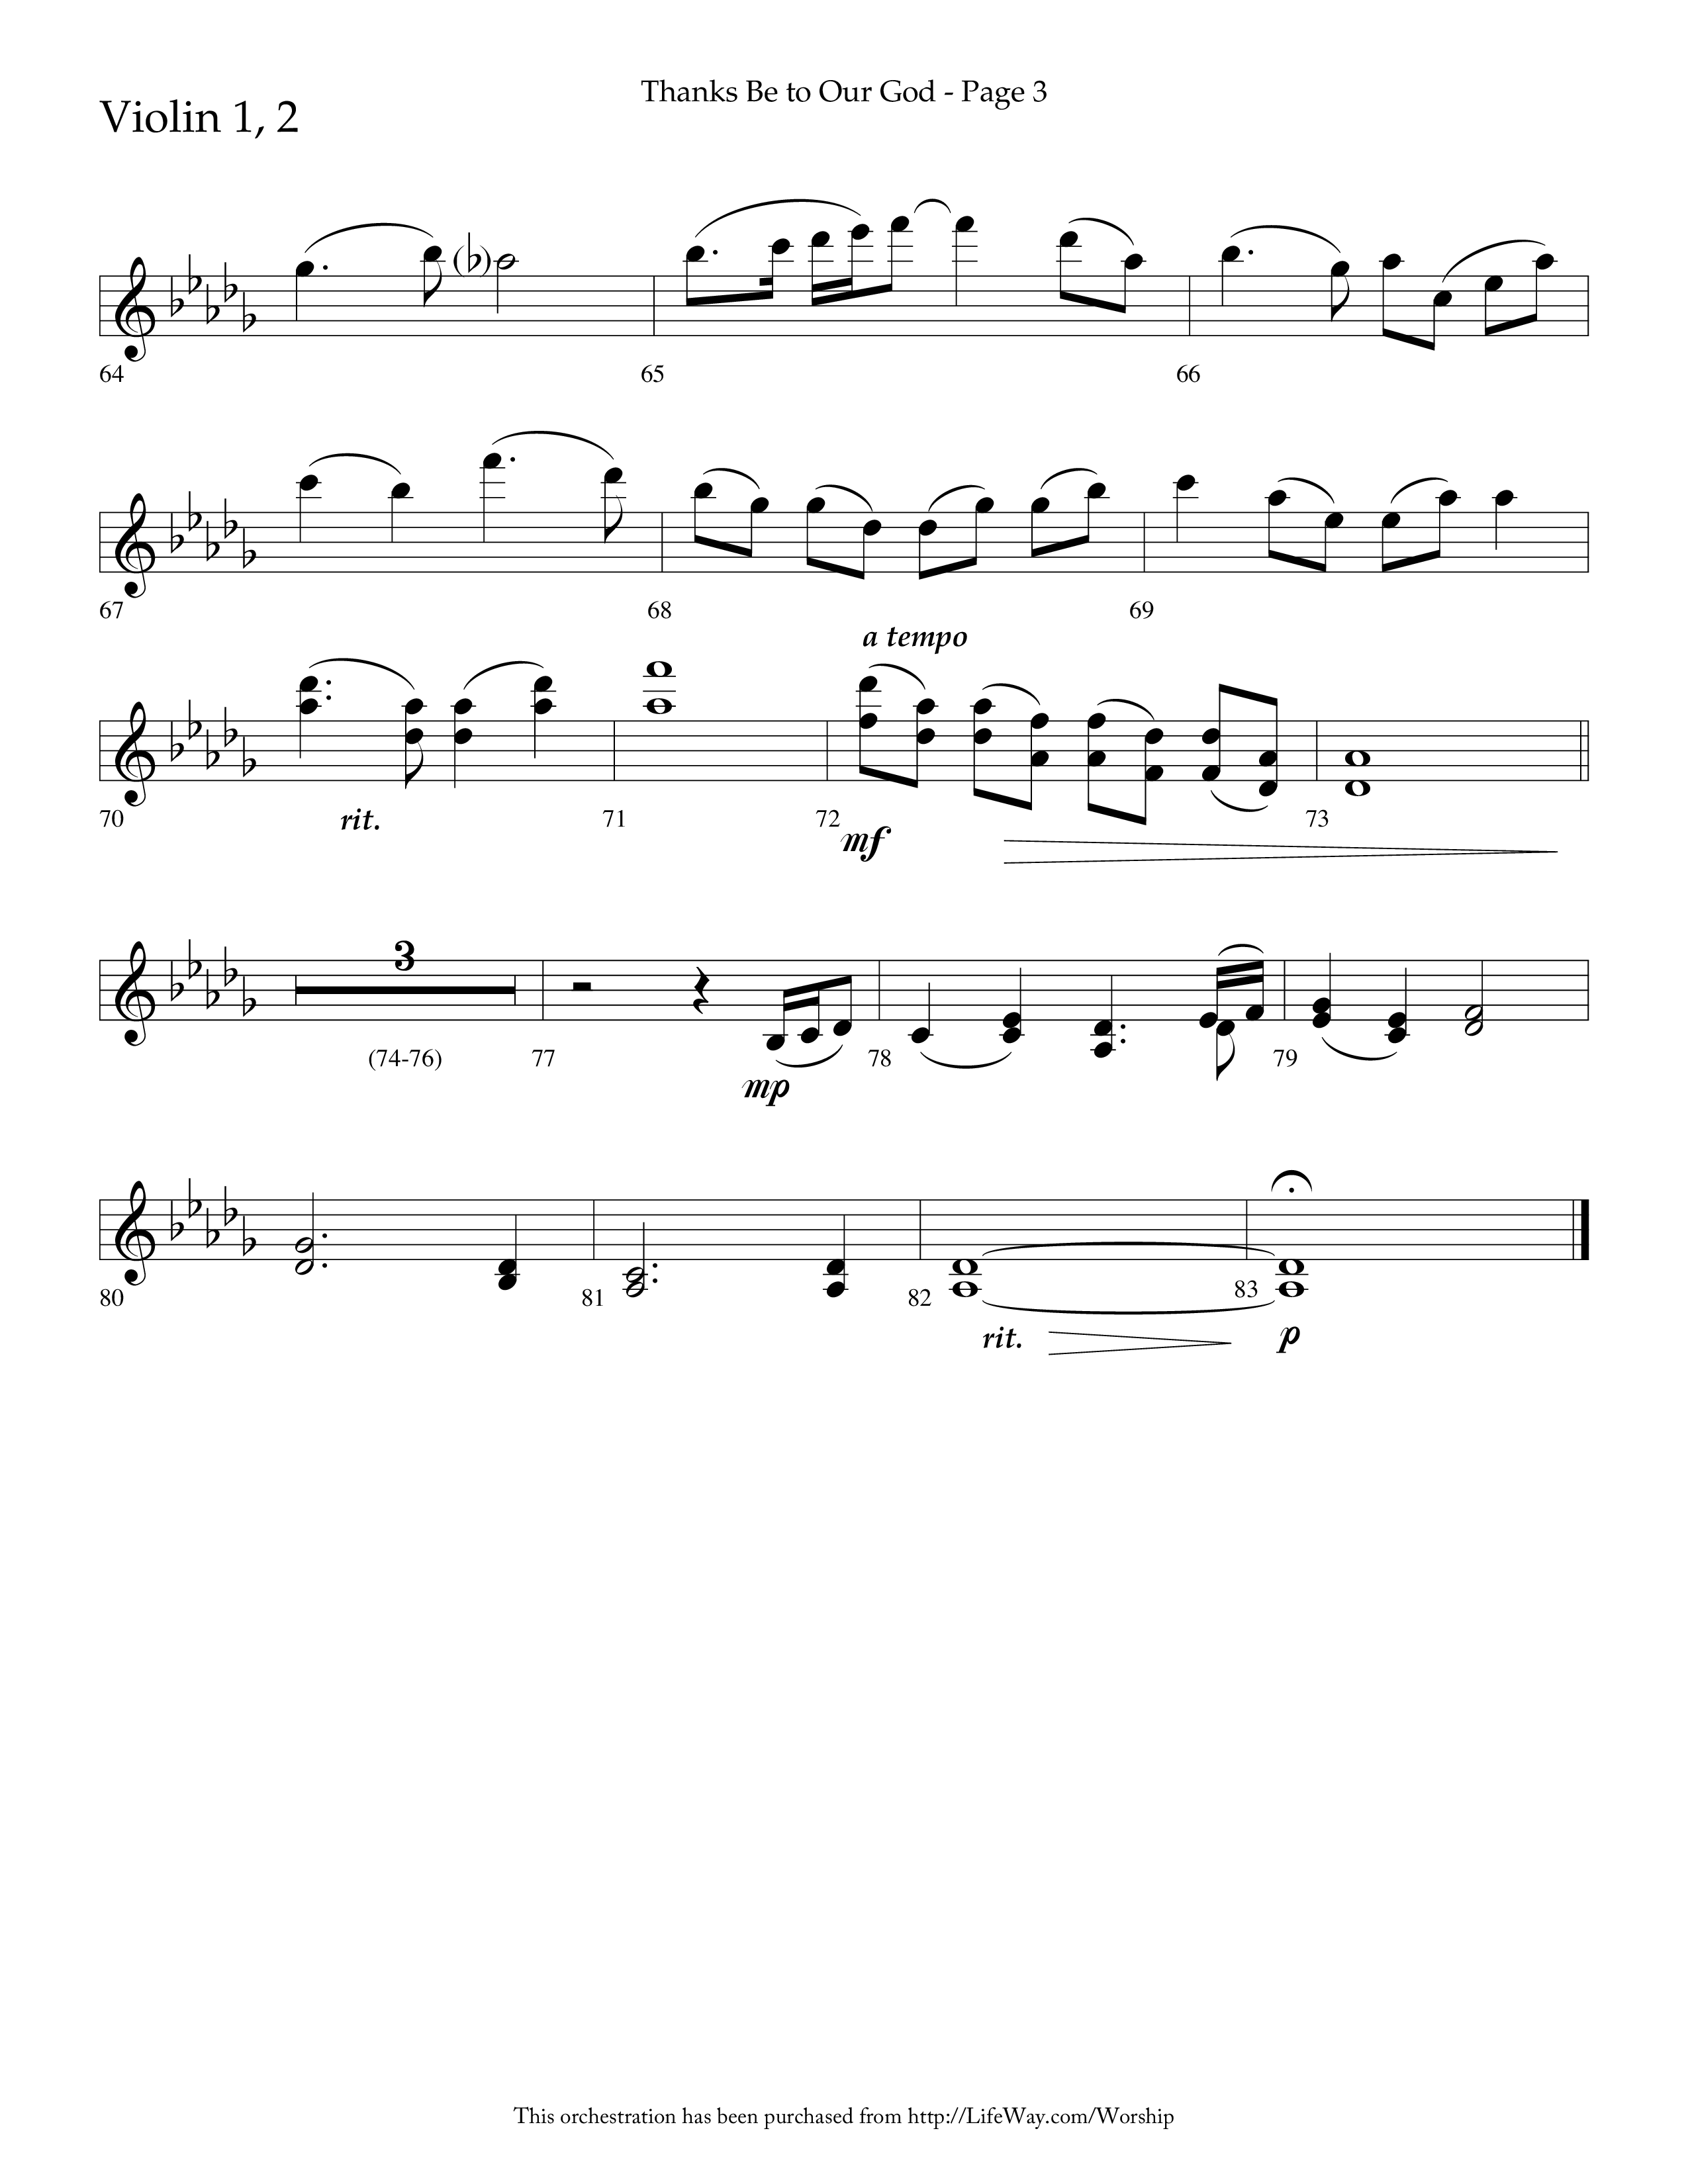 Thanks Be To Our God (Choral Anthem SATB) Violin 1/2 (Lifeway Choral / Arr. Russell Mauldin)